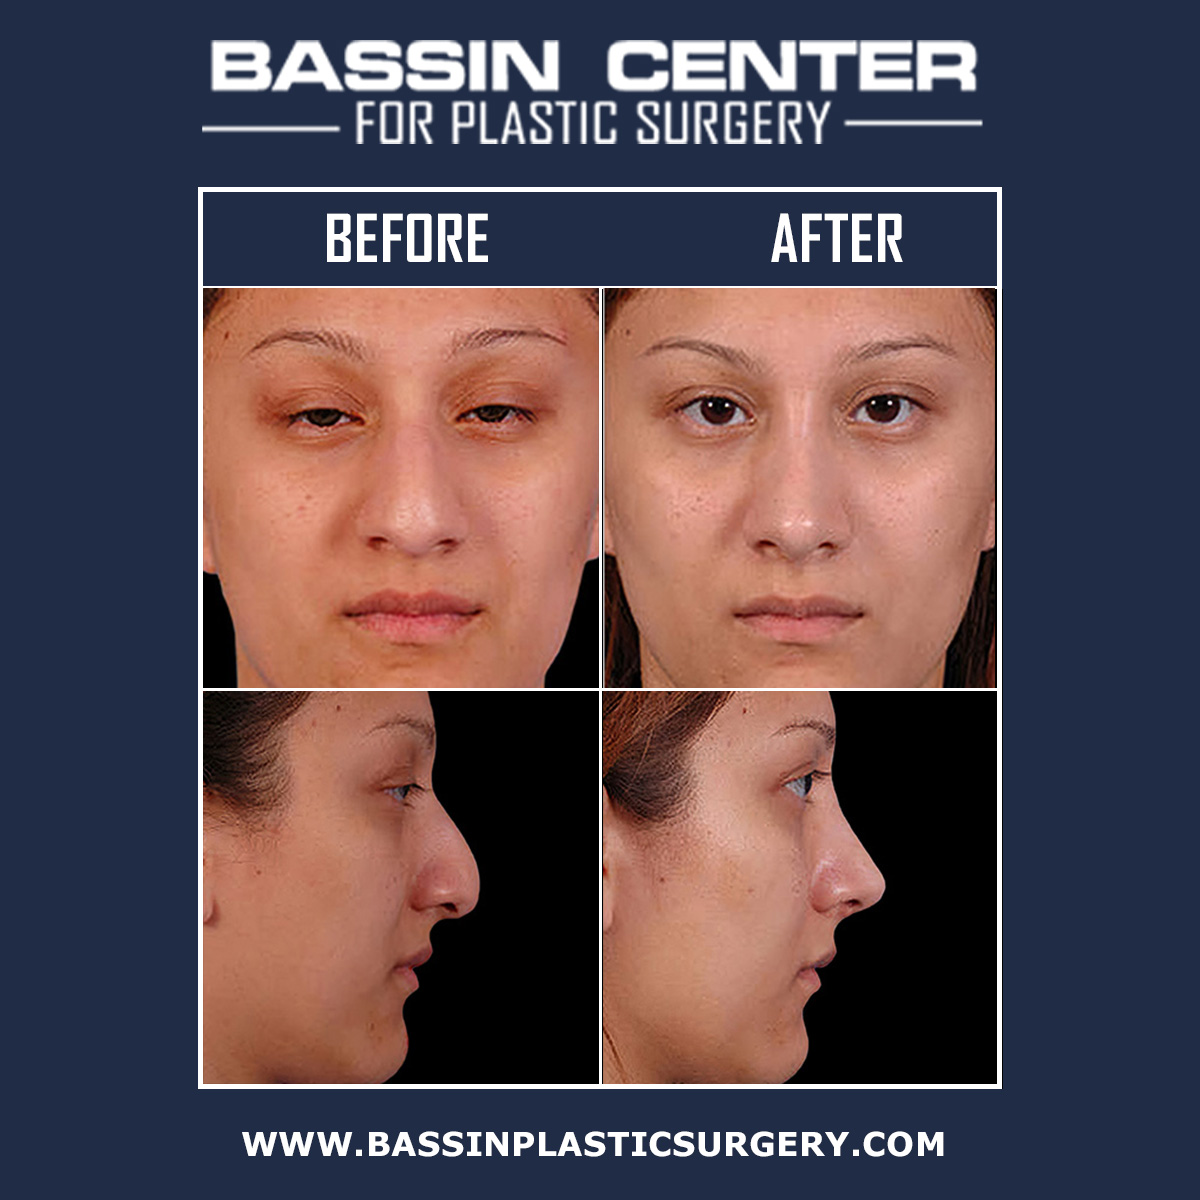 Rhinoplasty surgery in Tampa corrects the proportions of the nose for a more symmetrical appearance. Bassin Center For Plastic Surgery in Tampa offers both "open" and "closed" rhinoplasty procedures to suit the needs of every patient.